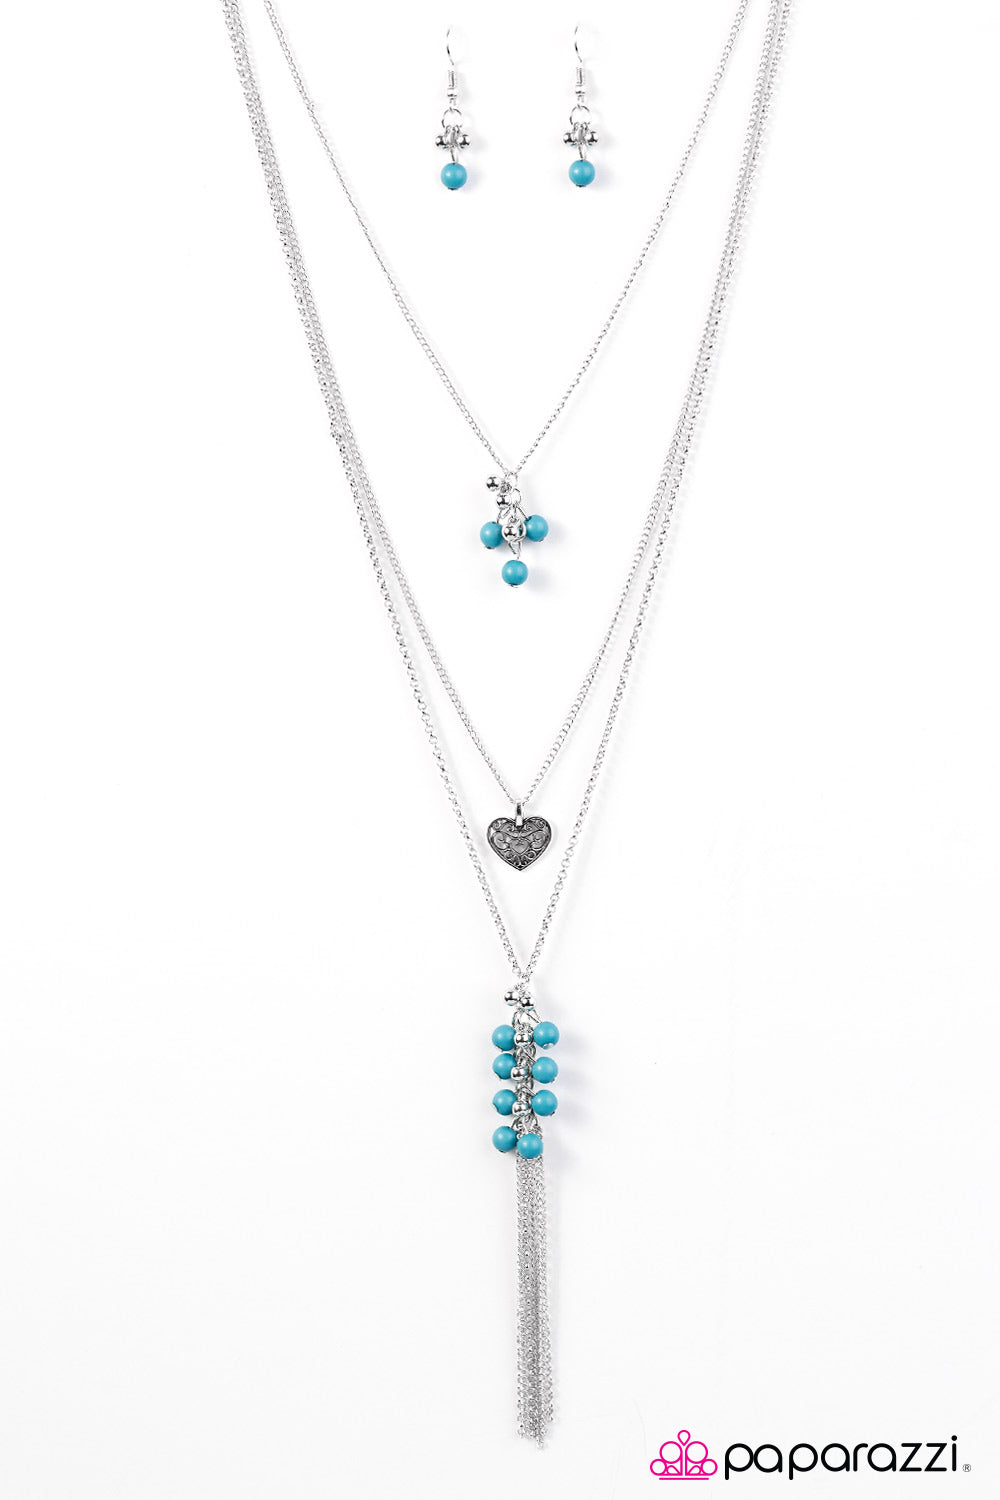 Paparazzi ♥ Whats Not To Love? - Blue ♥  Necklace